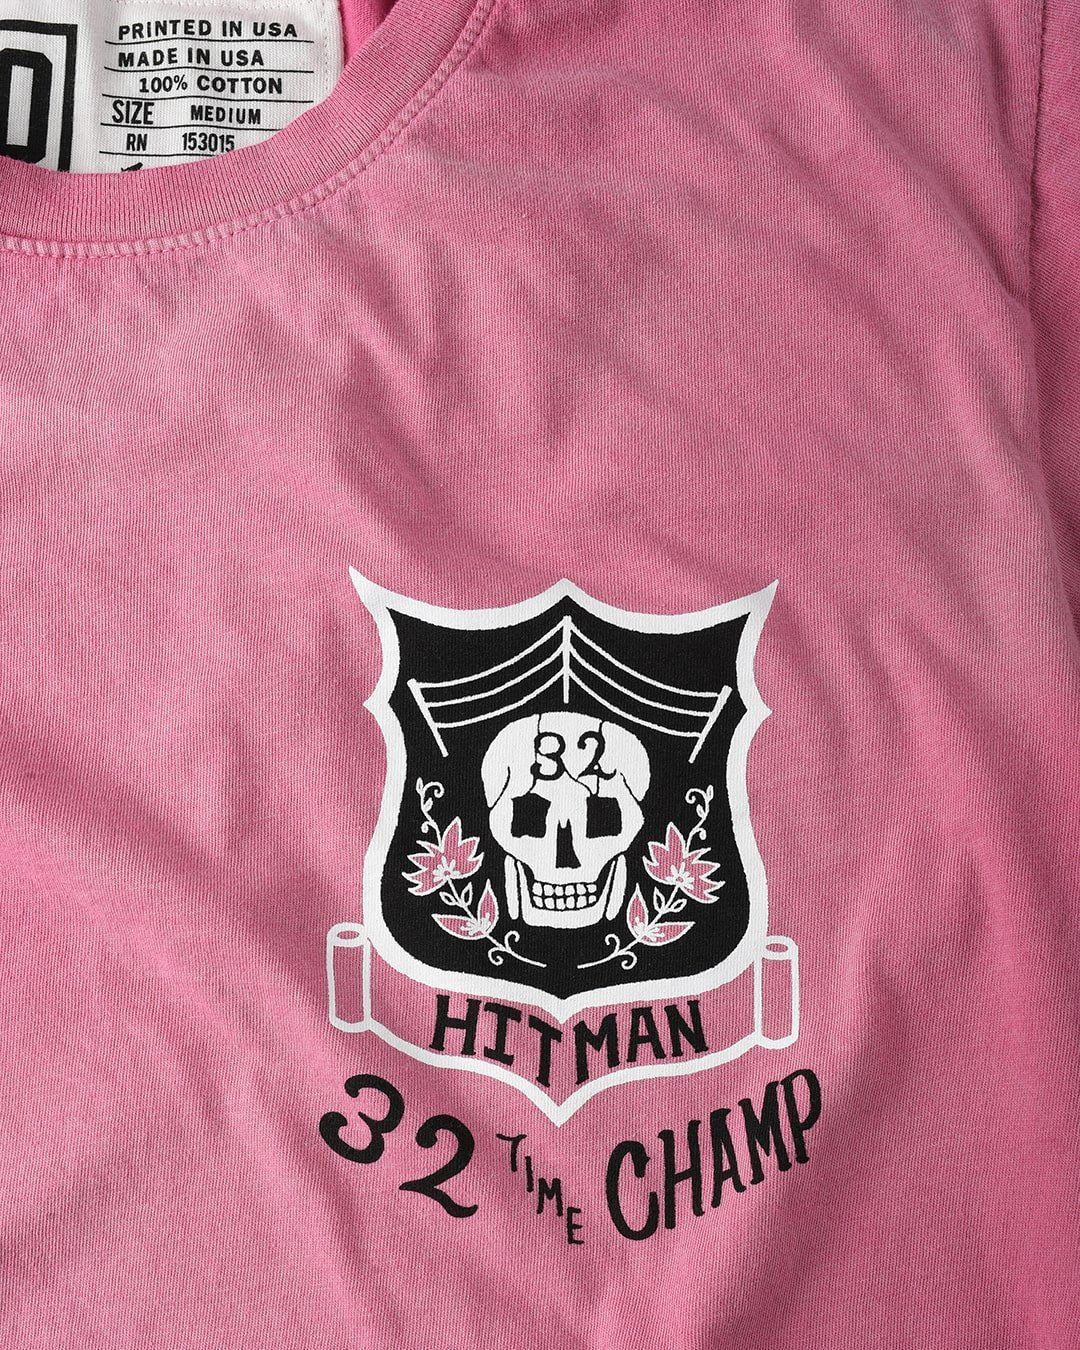 Bret Hart 32 Time Champ Pink Tee - Roots of Fight Canada